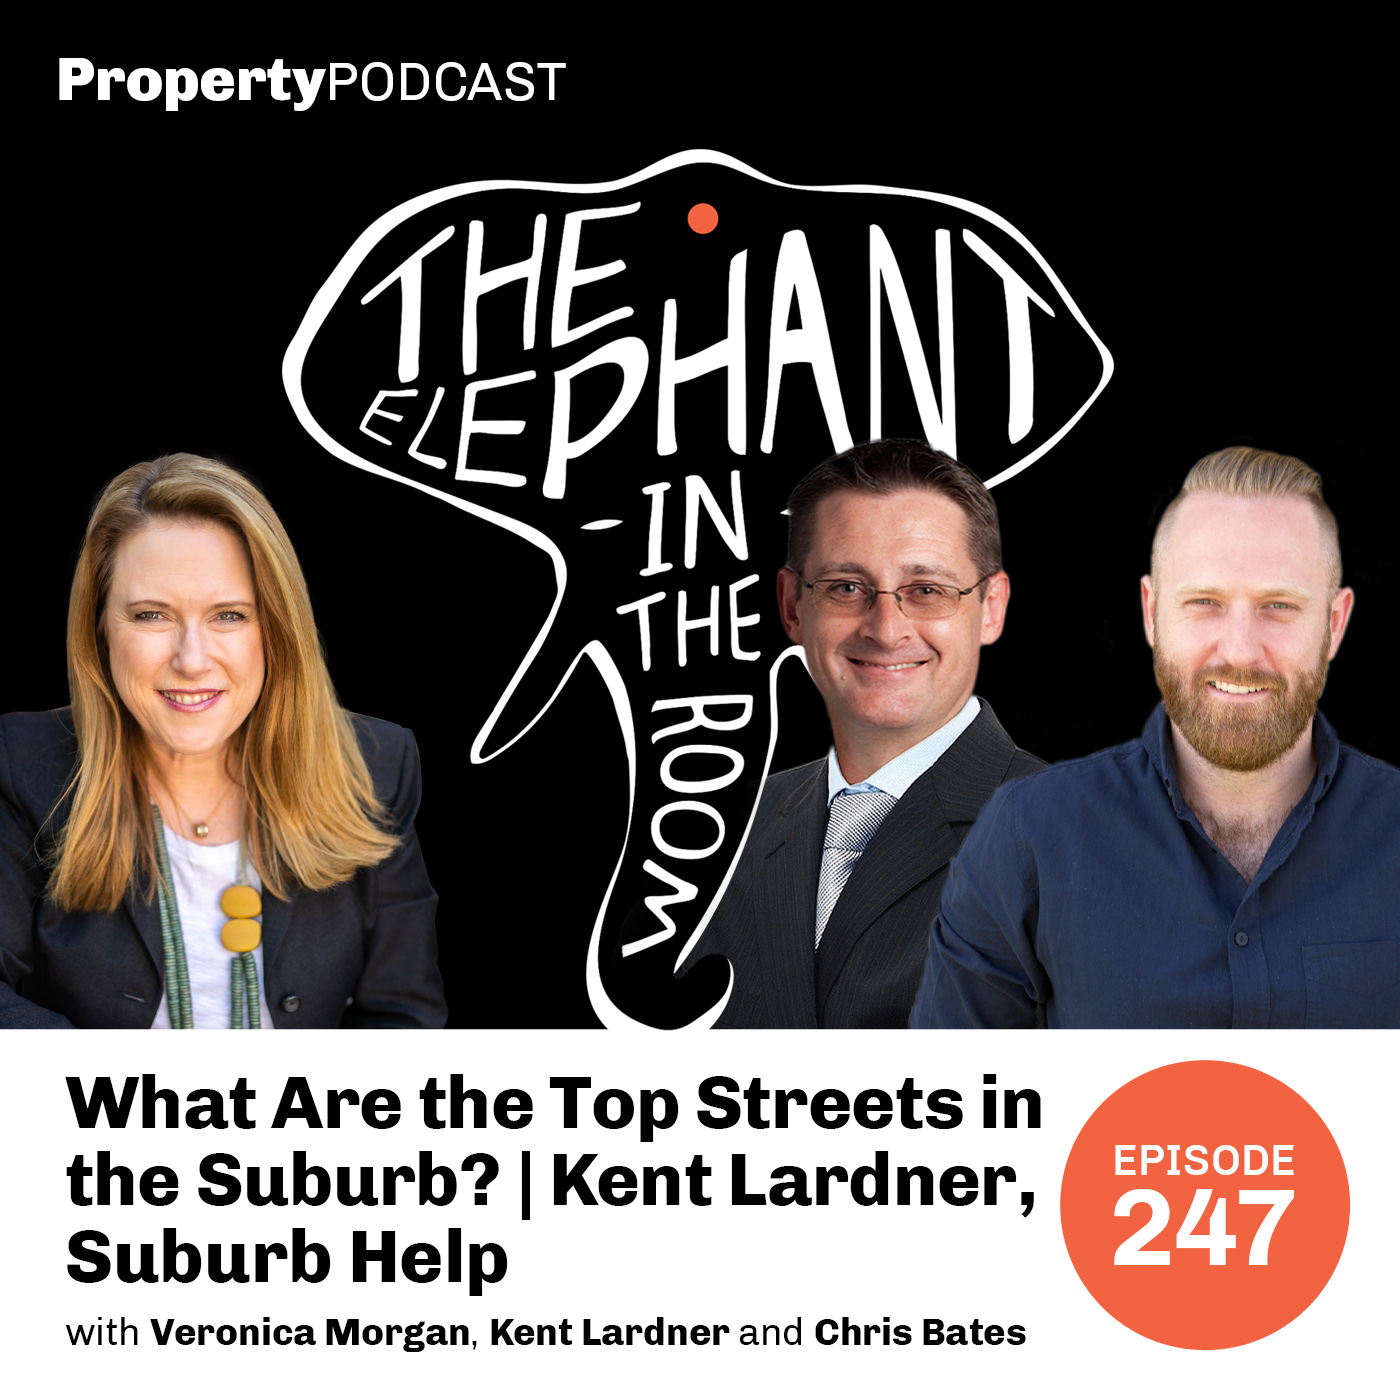 What Are the Top Streets in the Suburb? | Kent Lardner, Suburb Help